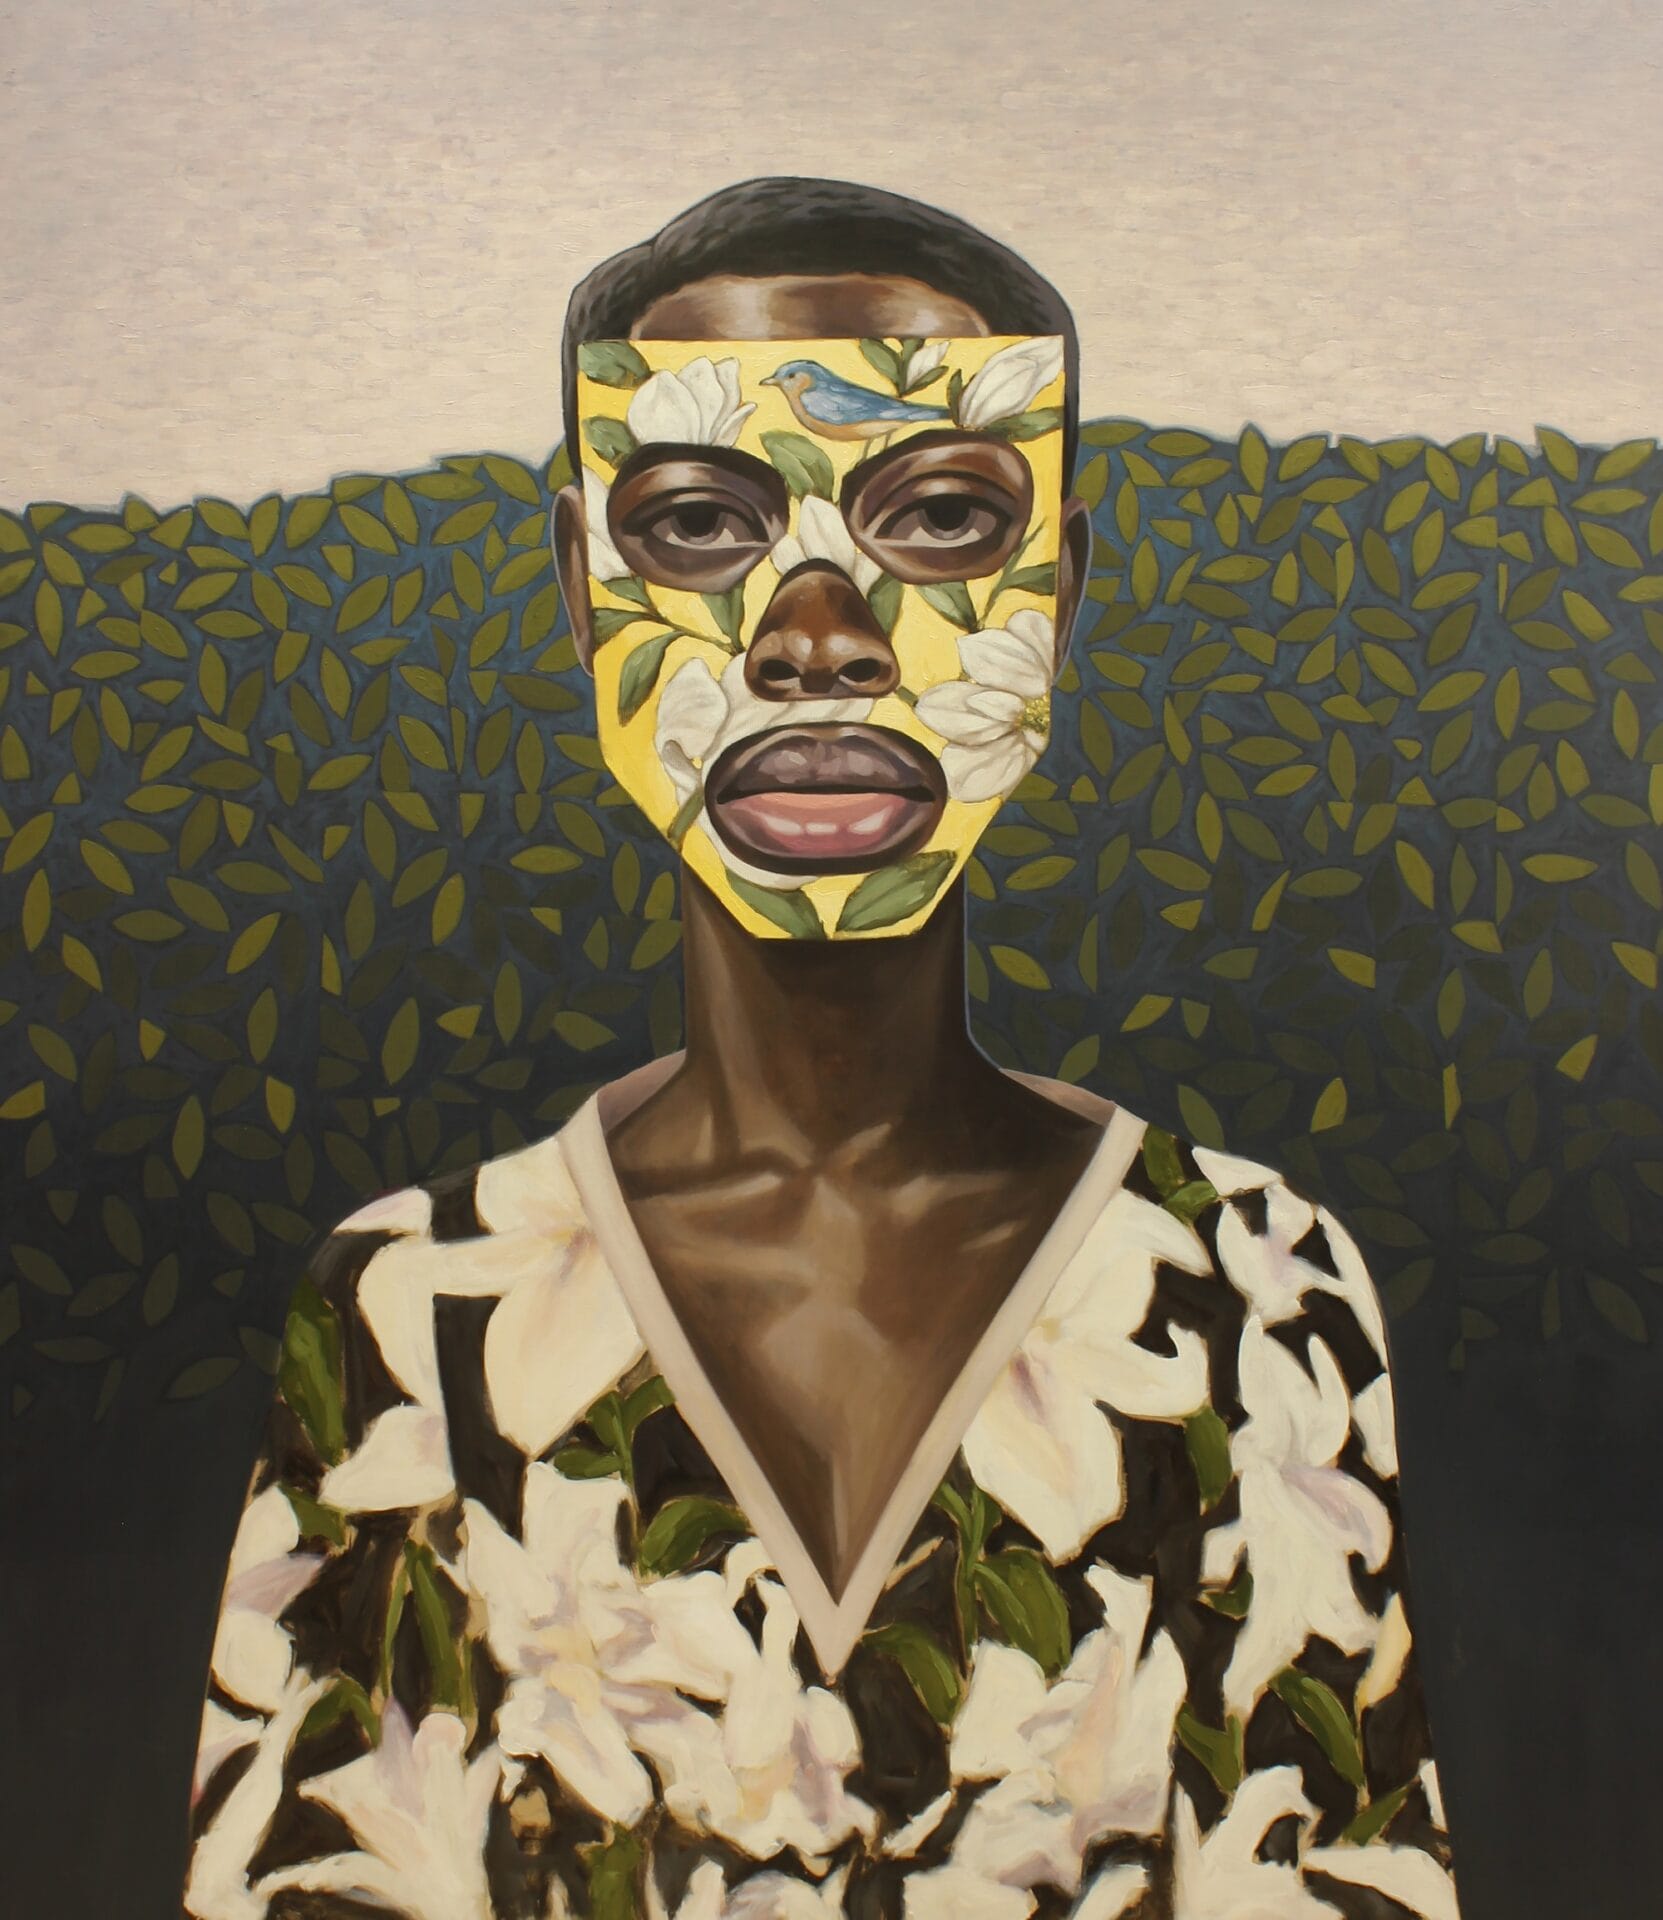 an oil painting of an imagined young black woman wearing a a floral top and a patterned face mask that reveals her eyes, nose and mouth